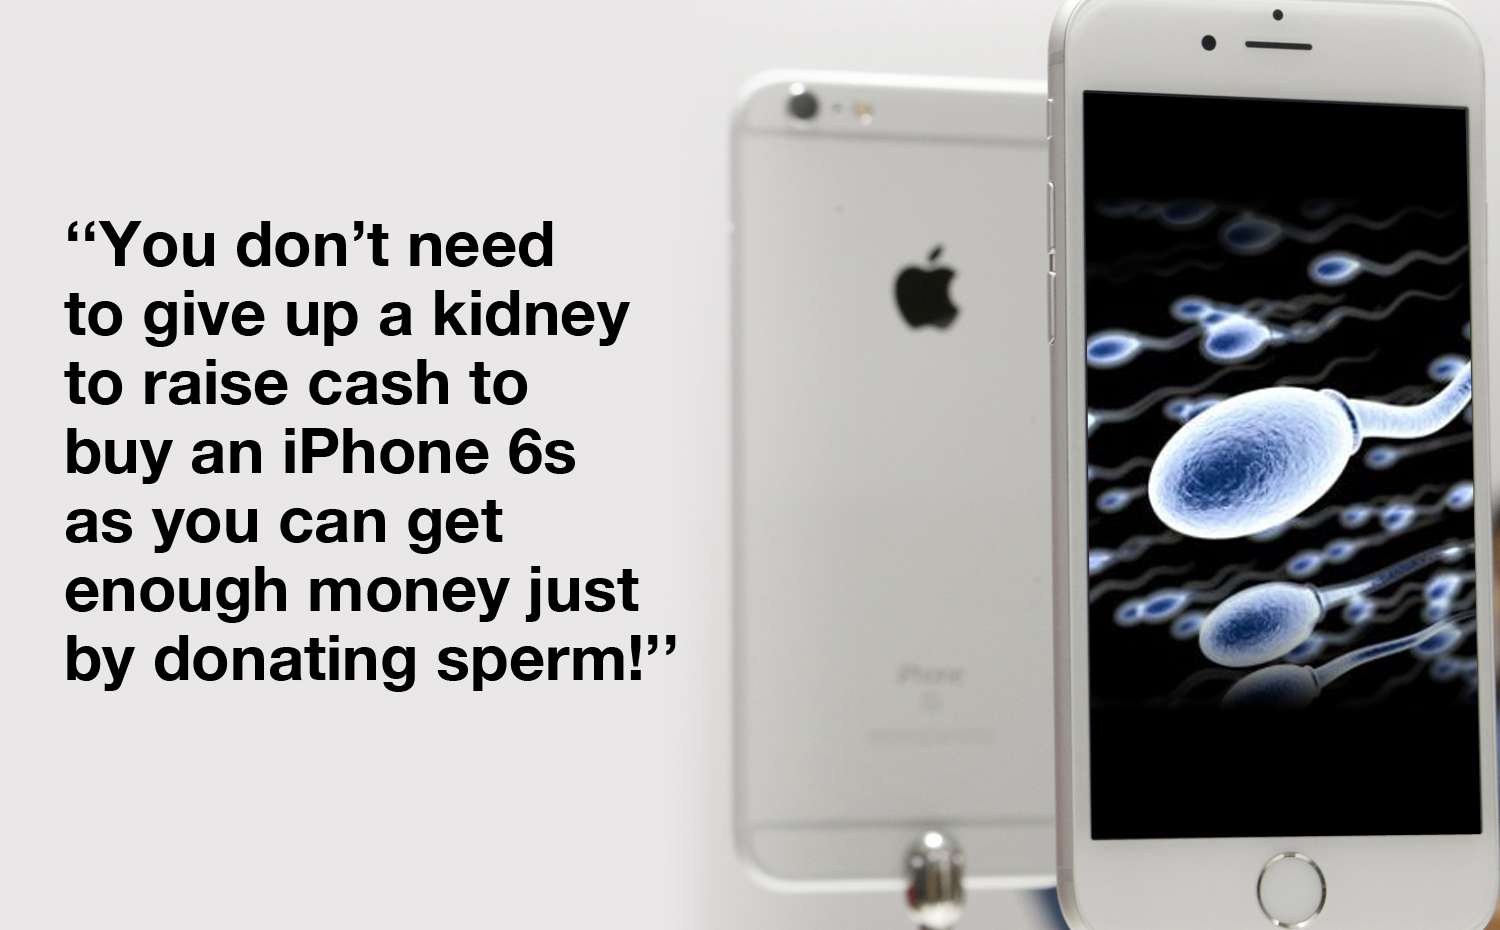 Two Chinese sperm banks Apple